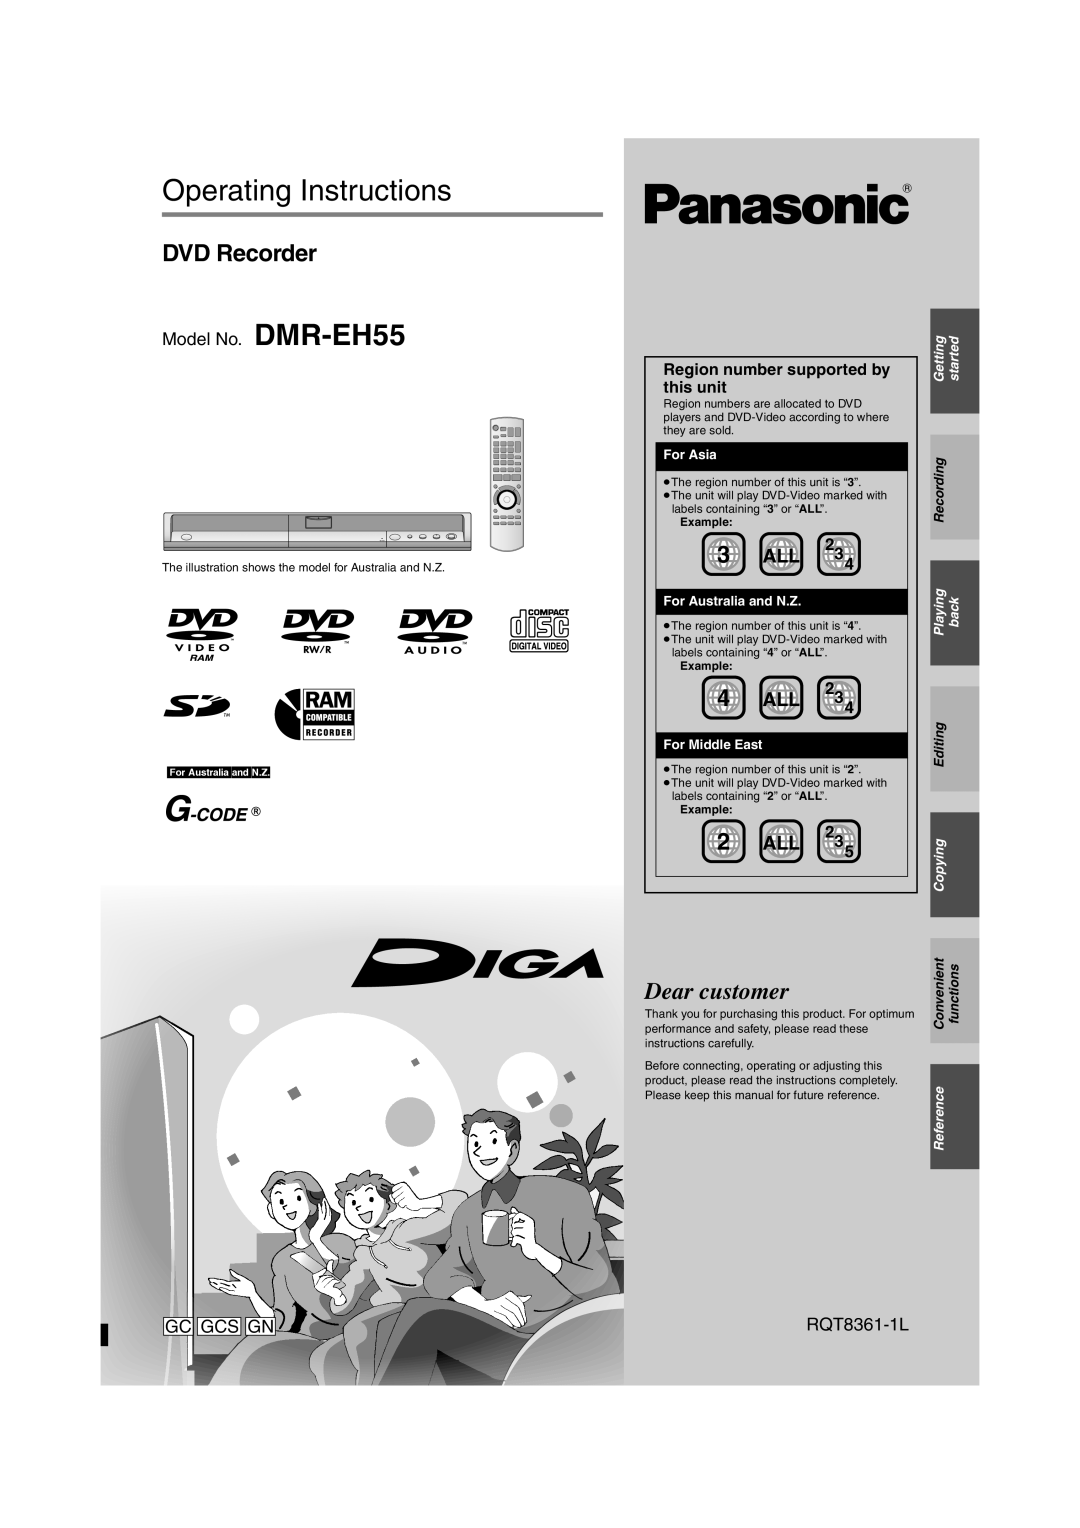 Philips operating instructions DVD Recorder, Model No. DMR-EH55, RQT8361-1L, For Asia, For Australia and N.Z, Editing 